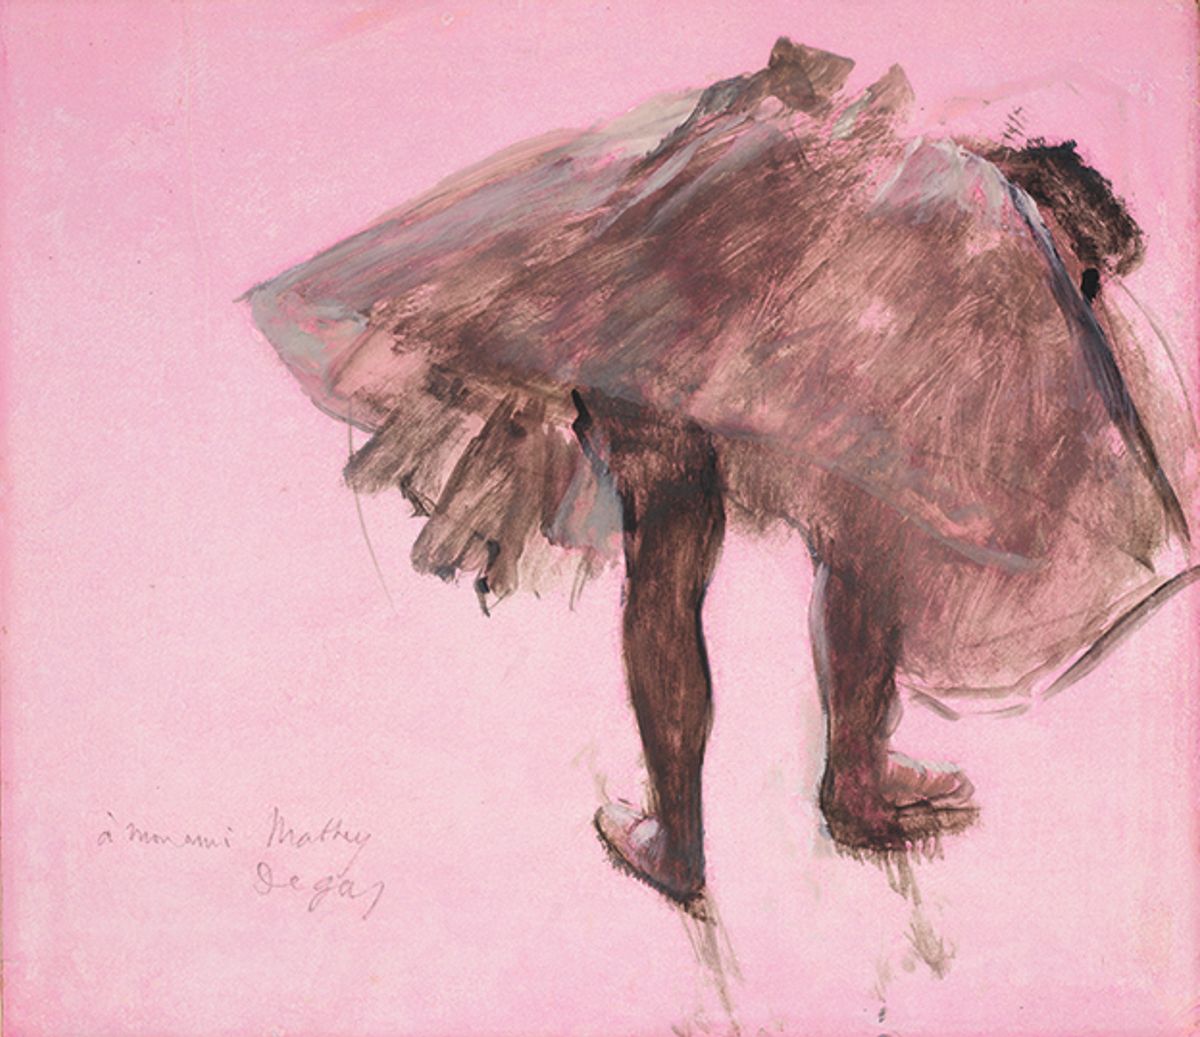 Edgar Degas’s Dancer Seen from Behind (around 1873) features in the RA show

© Collection of David Lachenmann